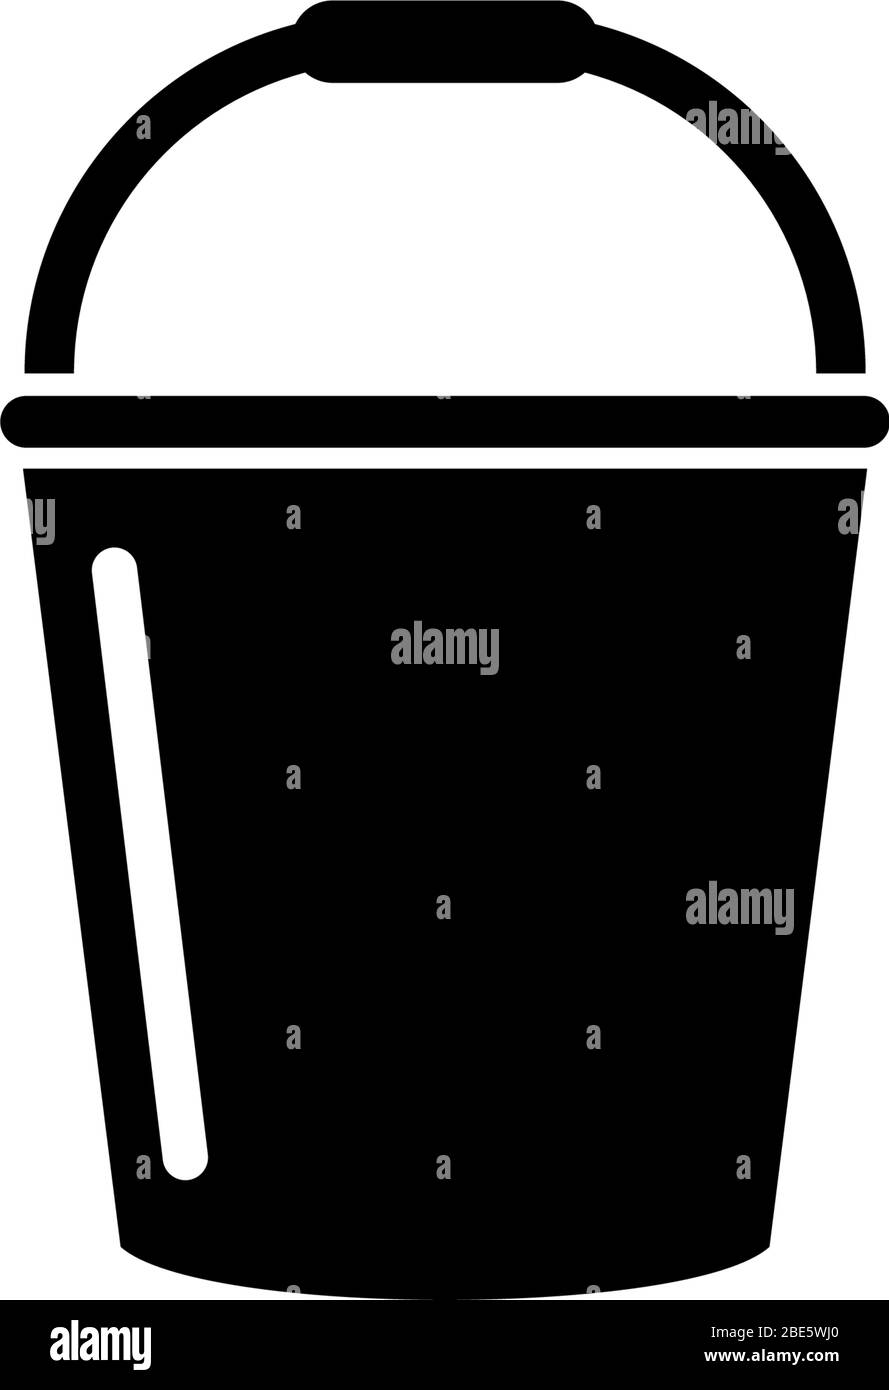 Garden Bucket, Container for Water. Flat Vector Icon illustration. Simple black symbol on white background. Garden Bucket, Container for Water sign de Stock Vector